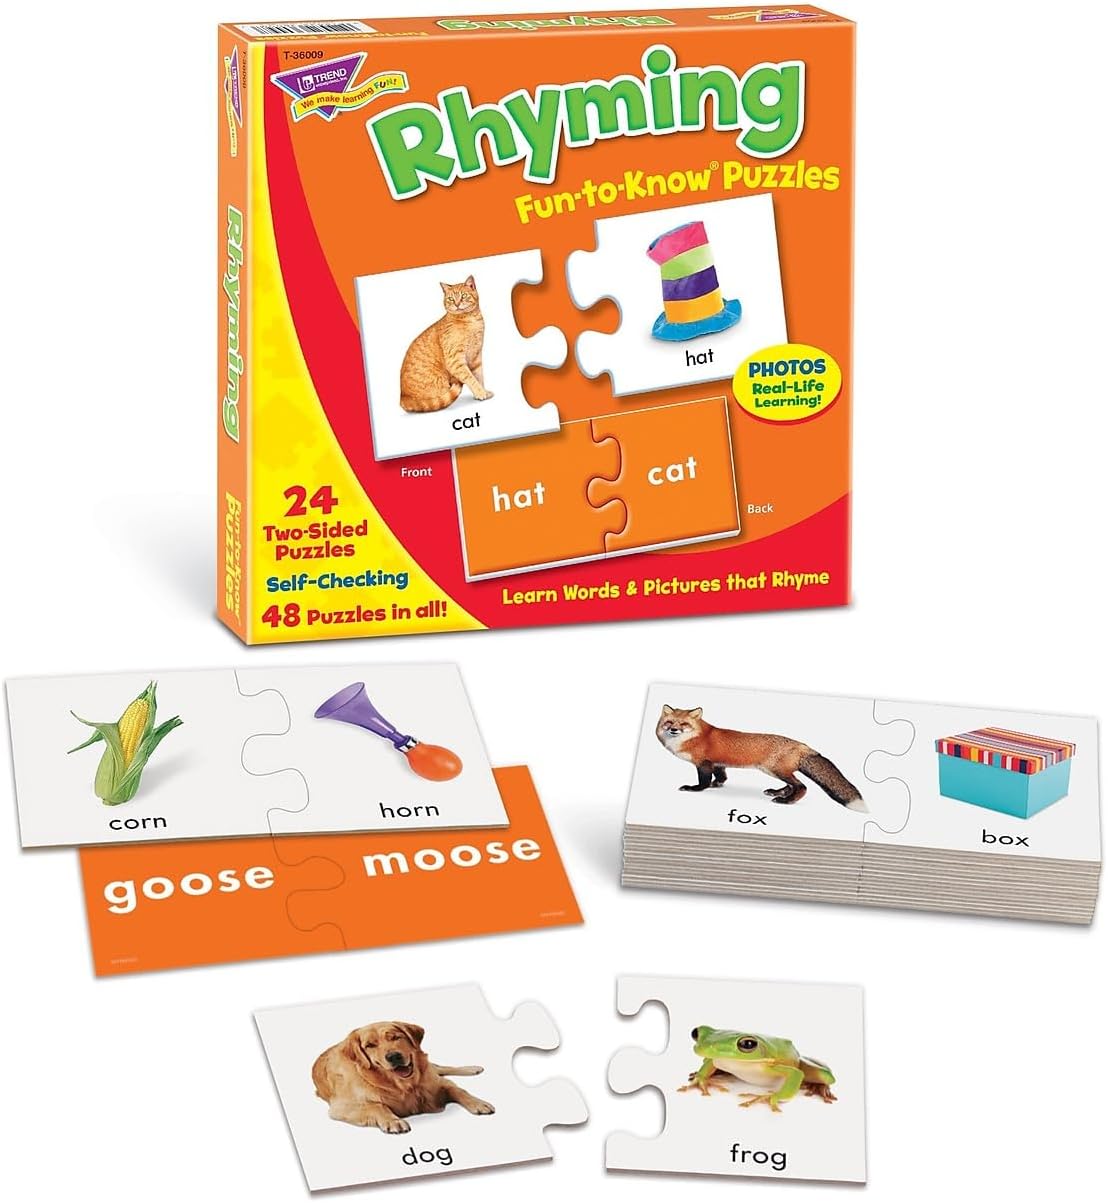 Trend Fun-To-Know Early Childhood Puzzles, Rhy